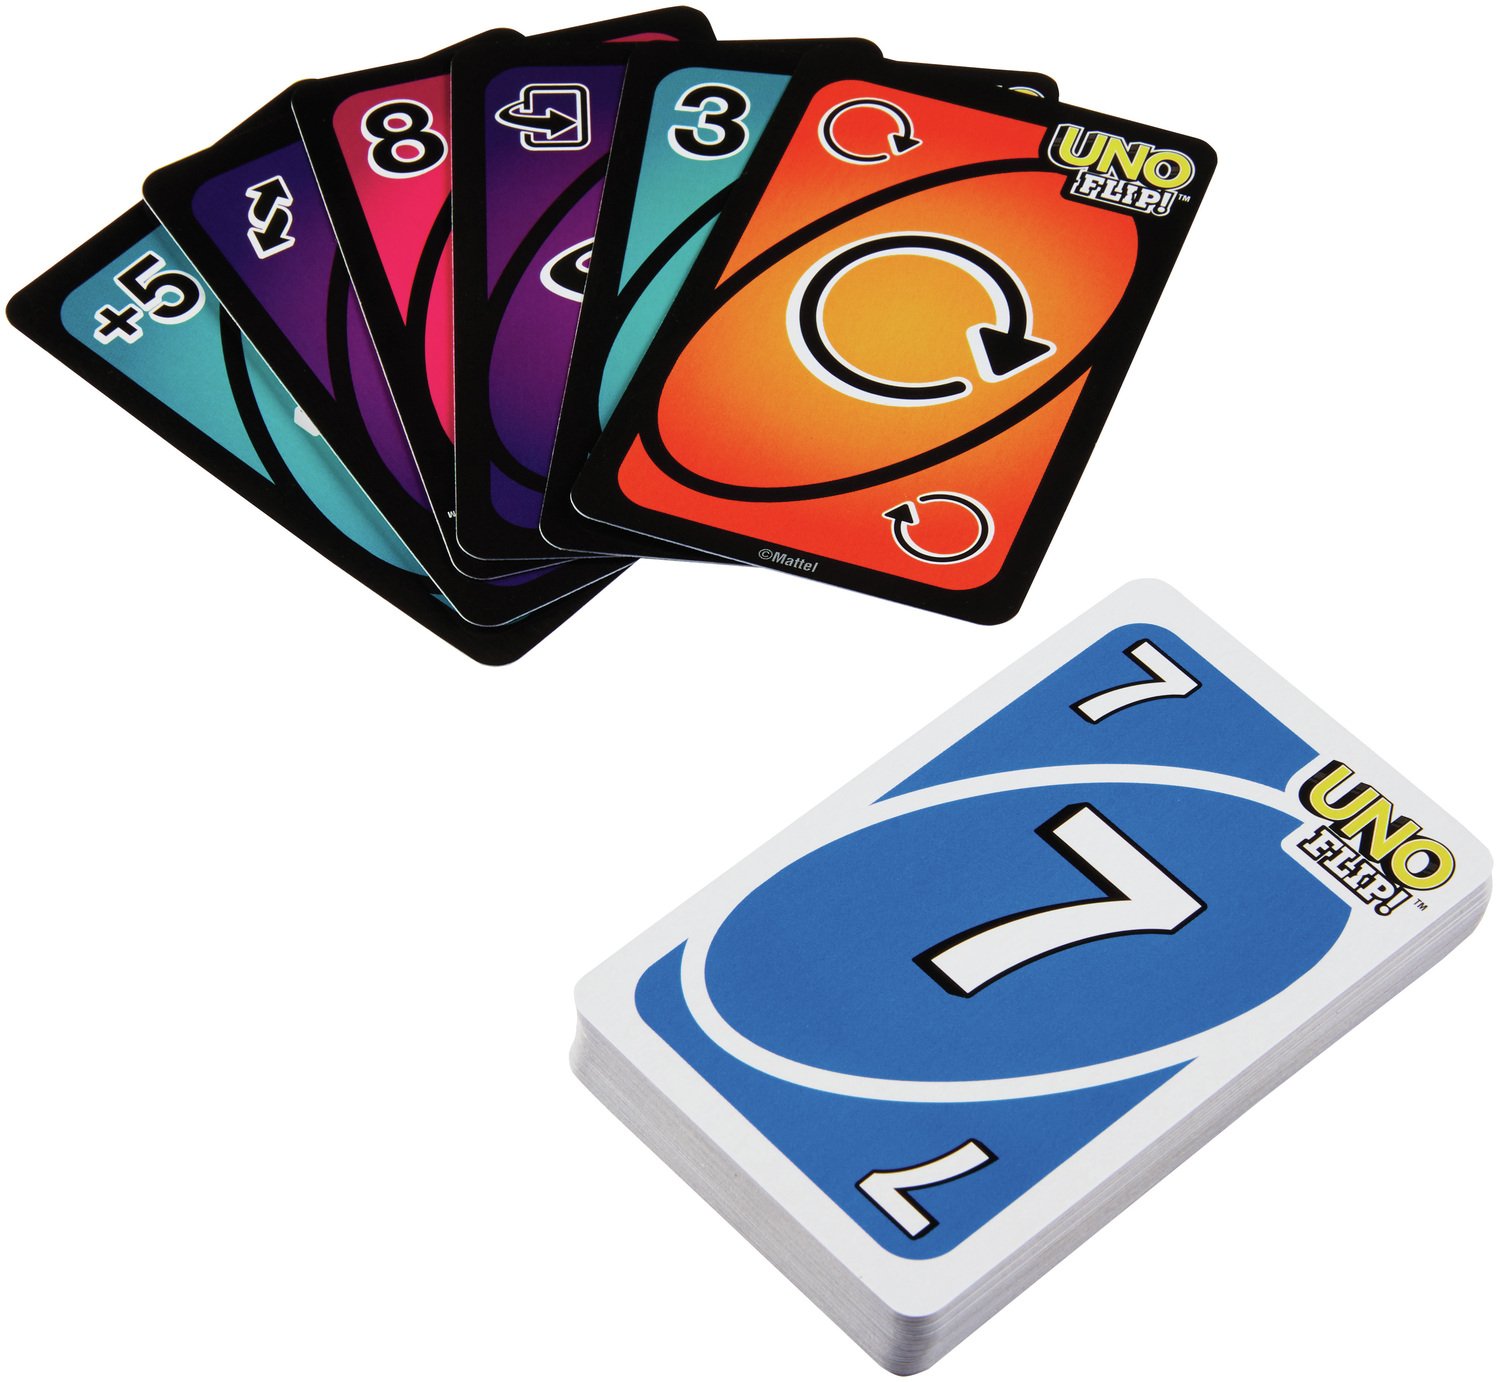 UNO Flip Card Game Review